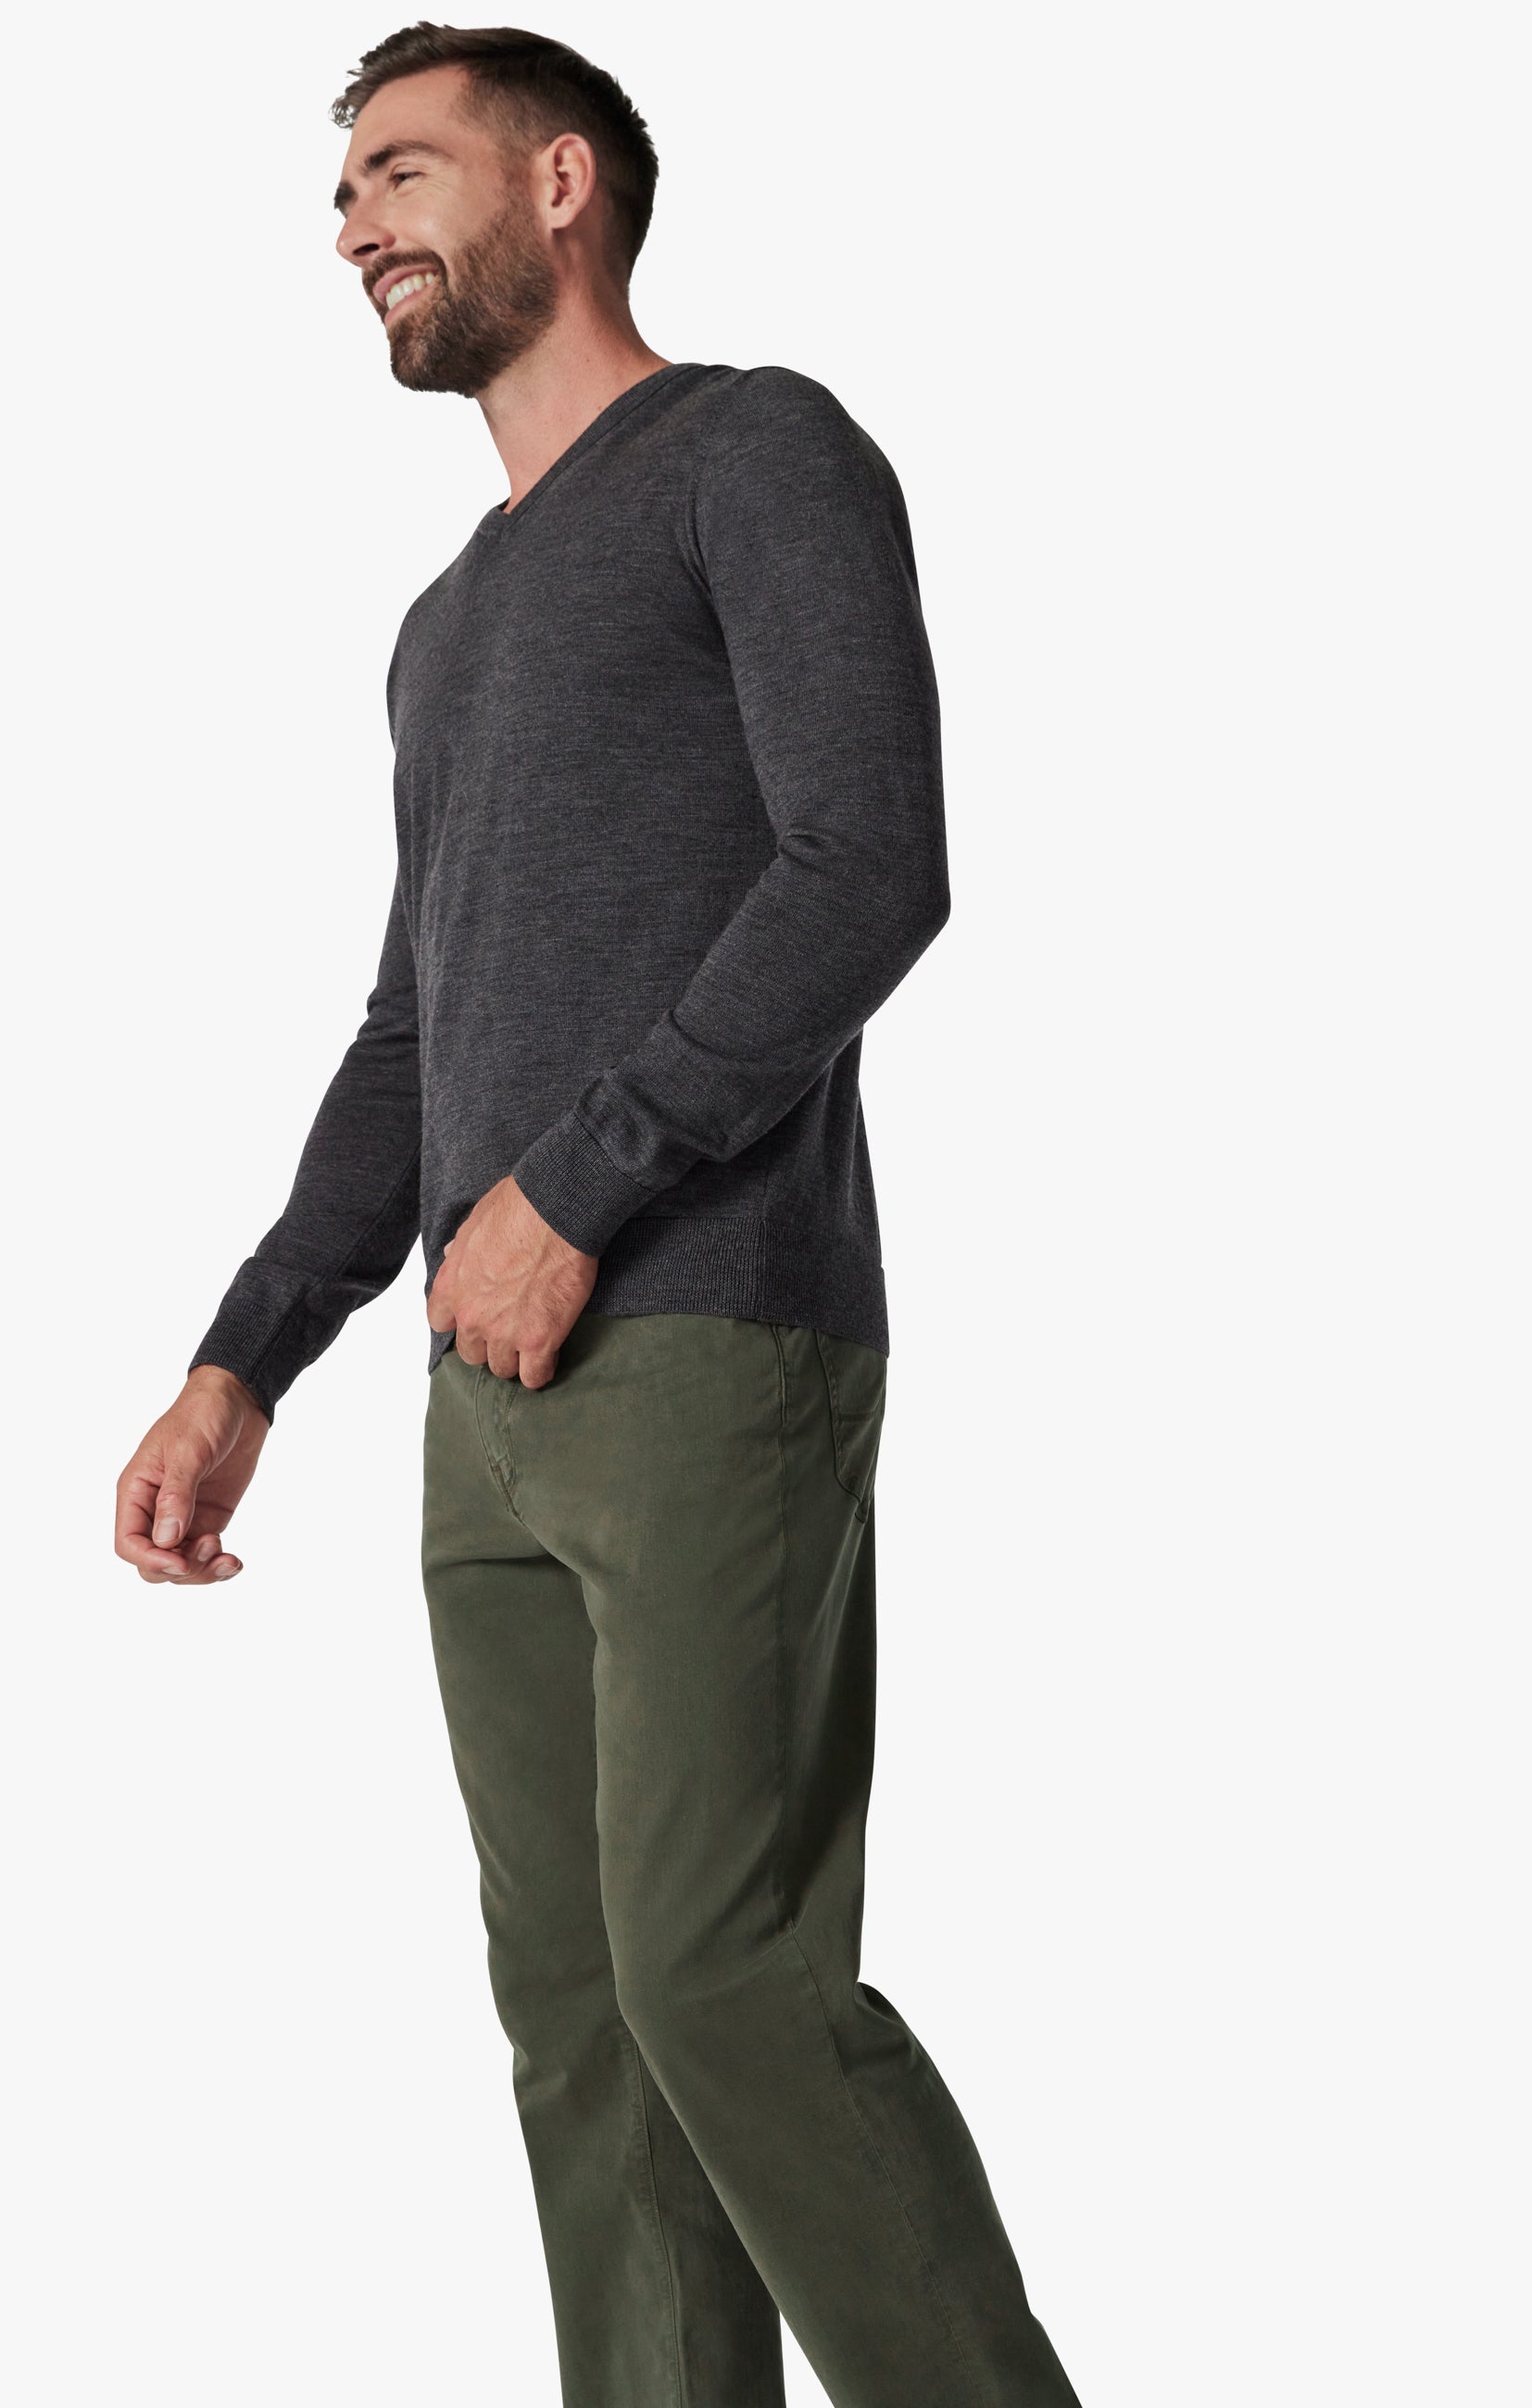 Charisma Classic Fit Pants in Green Twill Image 5